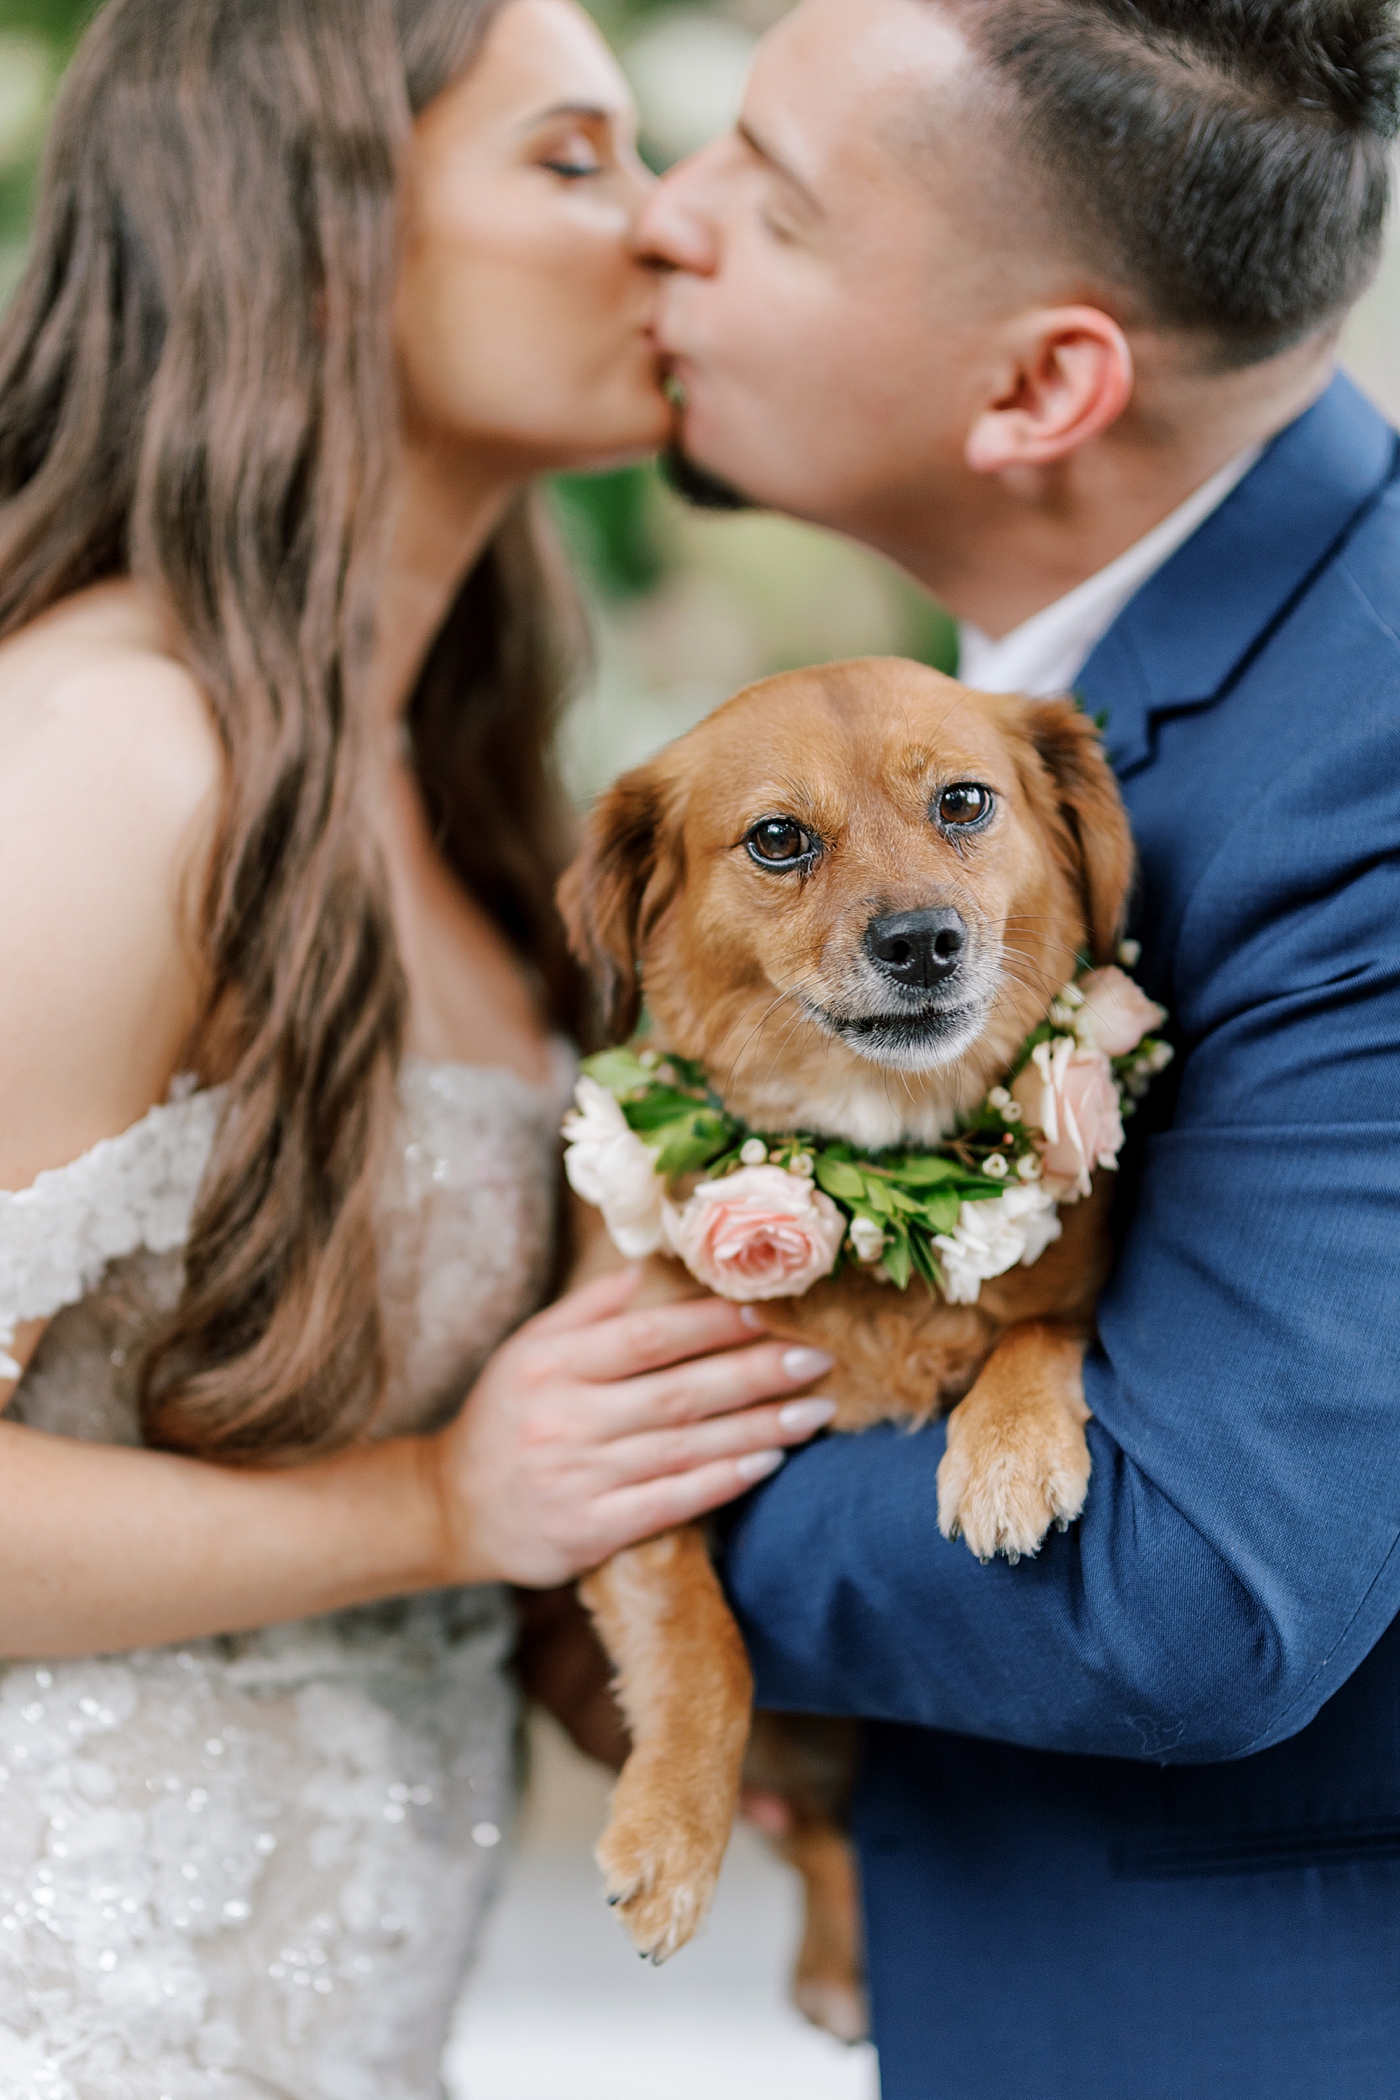 Detail of brown puppy held by kissing bride and groom | Image by Hope Helmuth Photography 